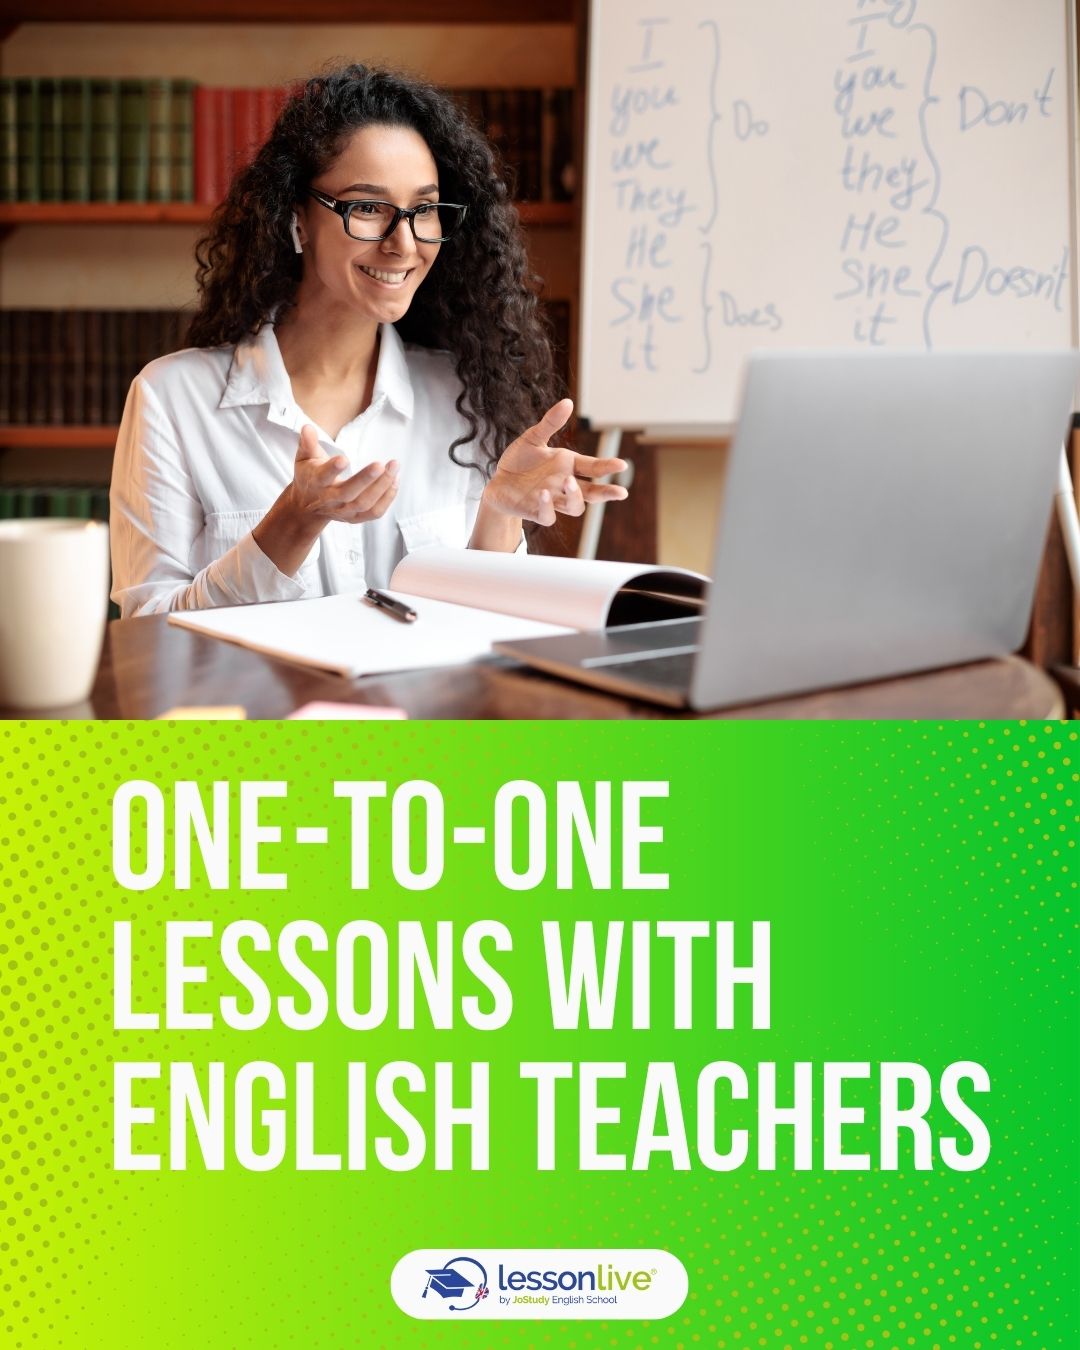 LESSON LIVE - ONLINE ENGLISH CURSES - ONE-TO-ONE LESSONS WITH ENGLISH TEACHERS